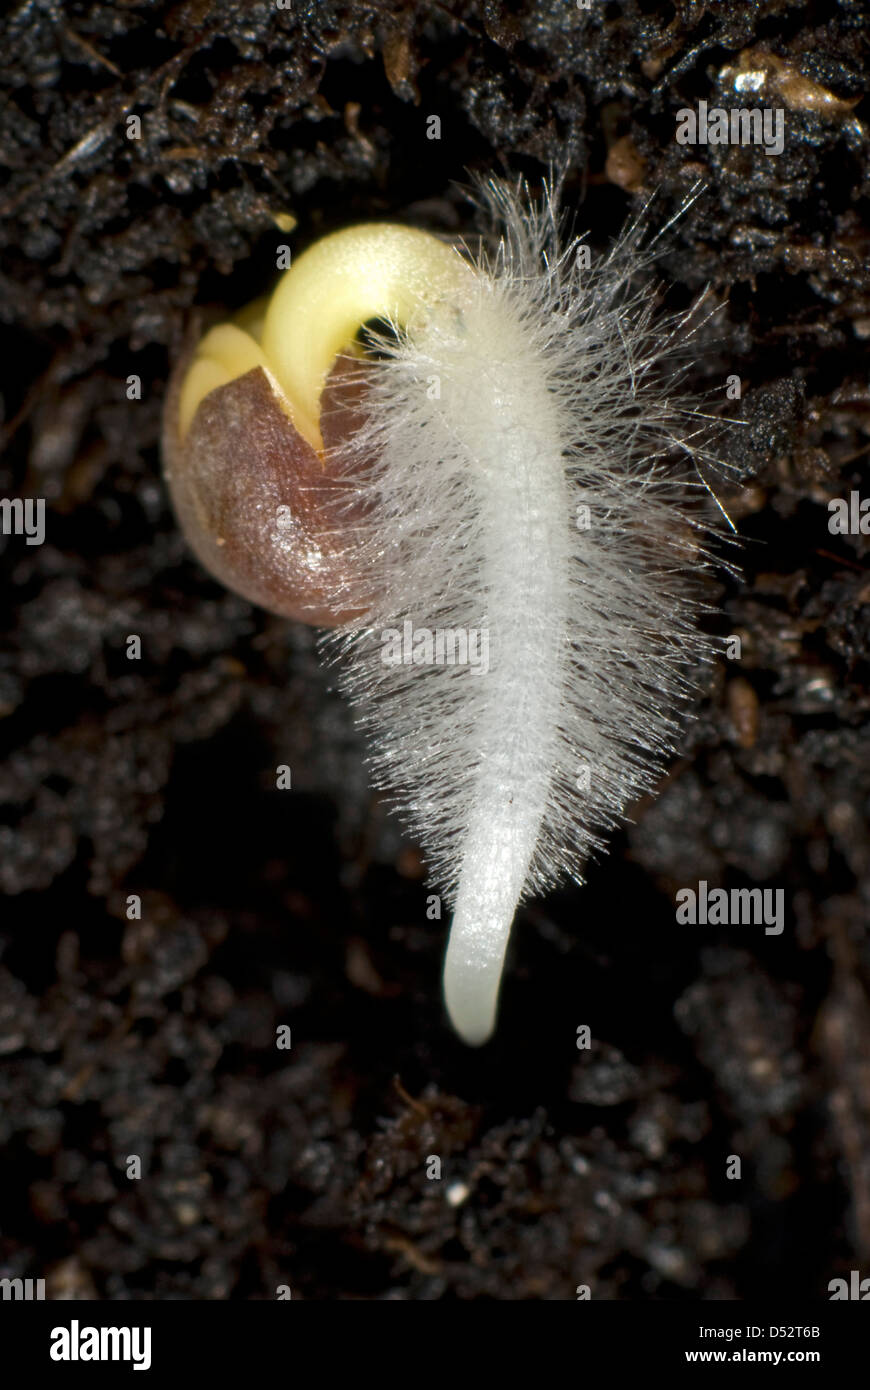 A germinating cabbage seed with root developing with root